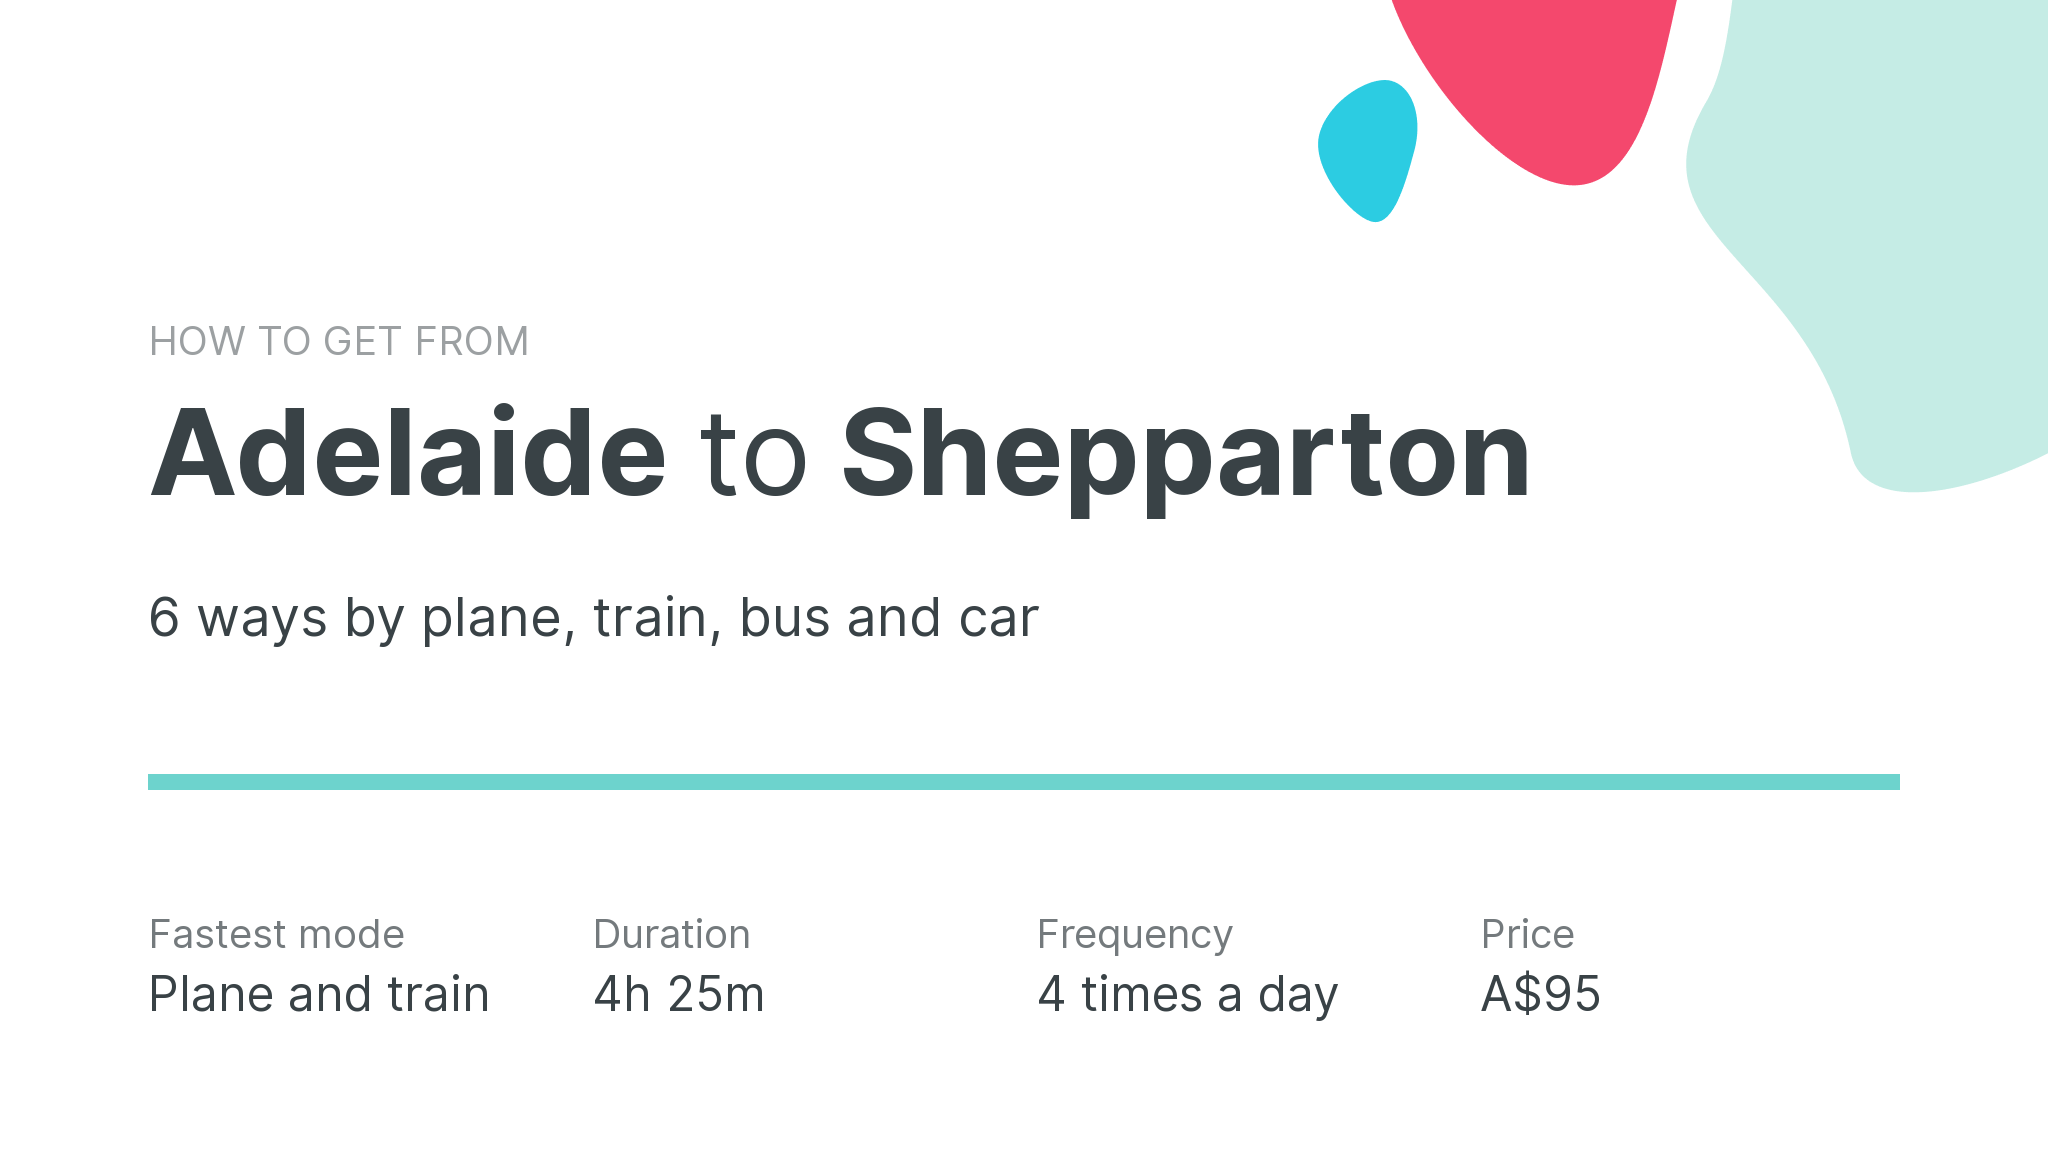 How do I get from Adelaide to Shepparton